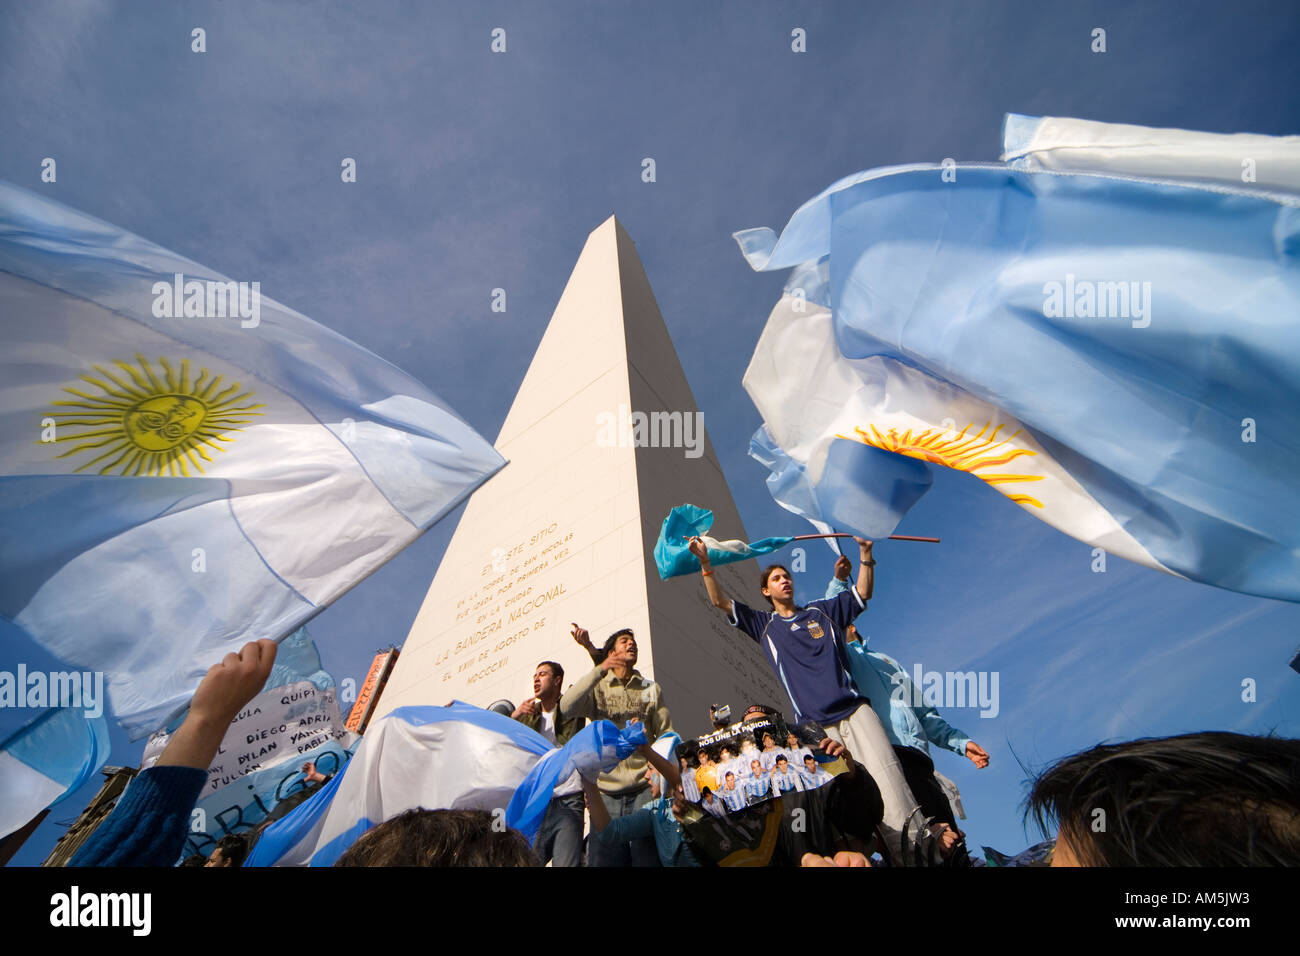 Argentina football soccer fans singing waving Argentinian flags underneath the Obelisk in Buenos Aires. Plaza de la Republica. Stock Photo